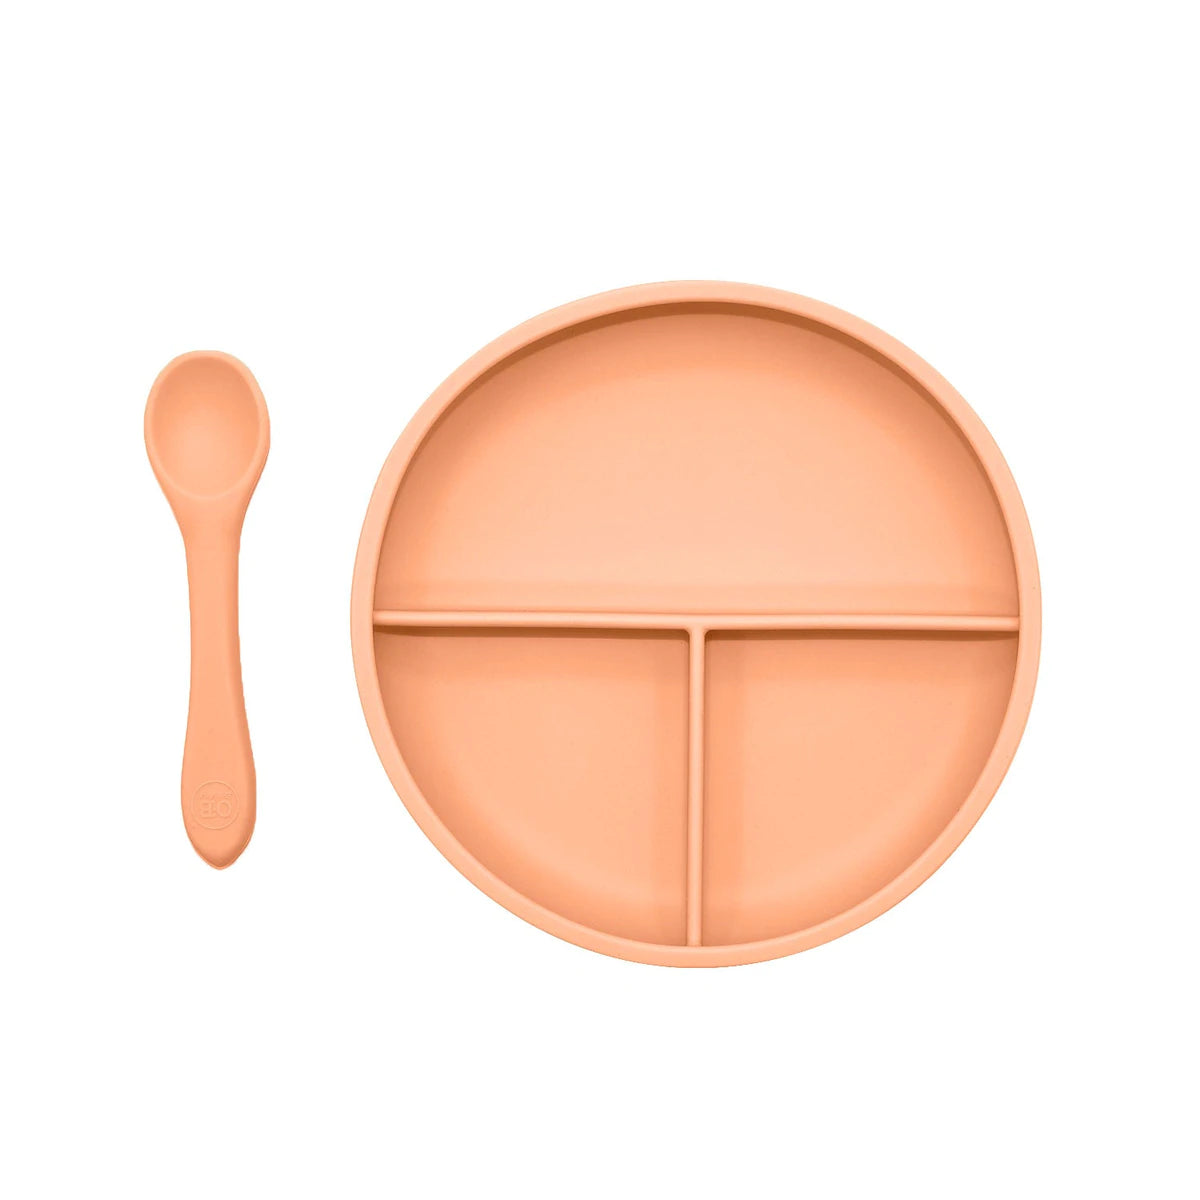 O.B Design | Silicone Suction Divider Plate & Spoon Set